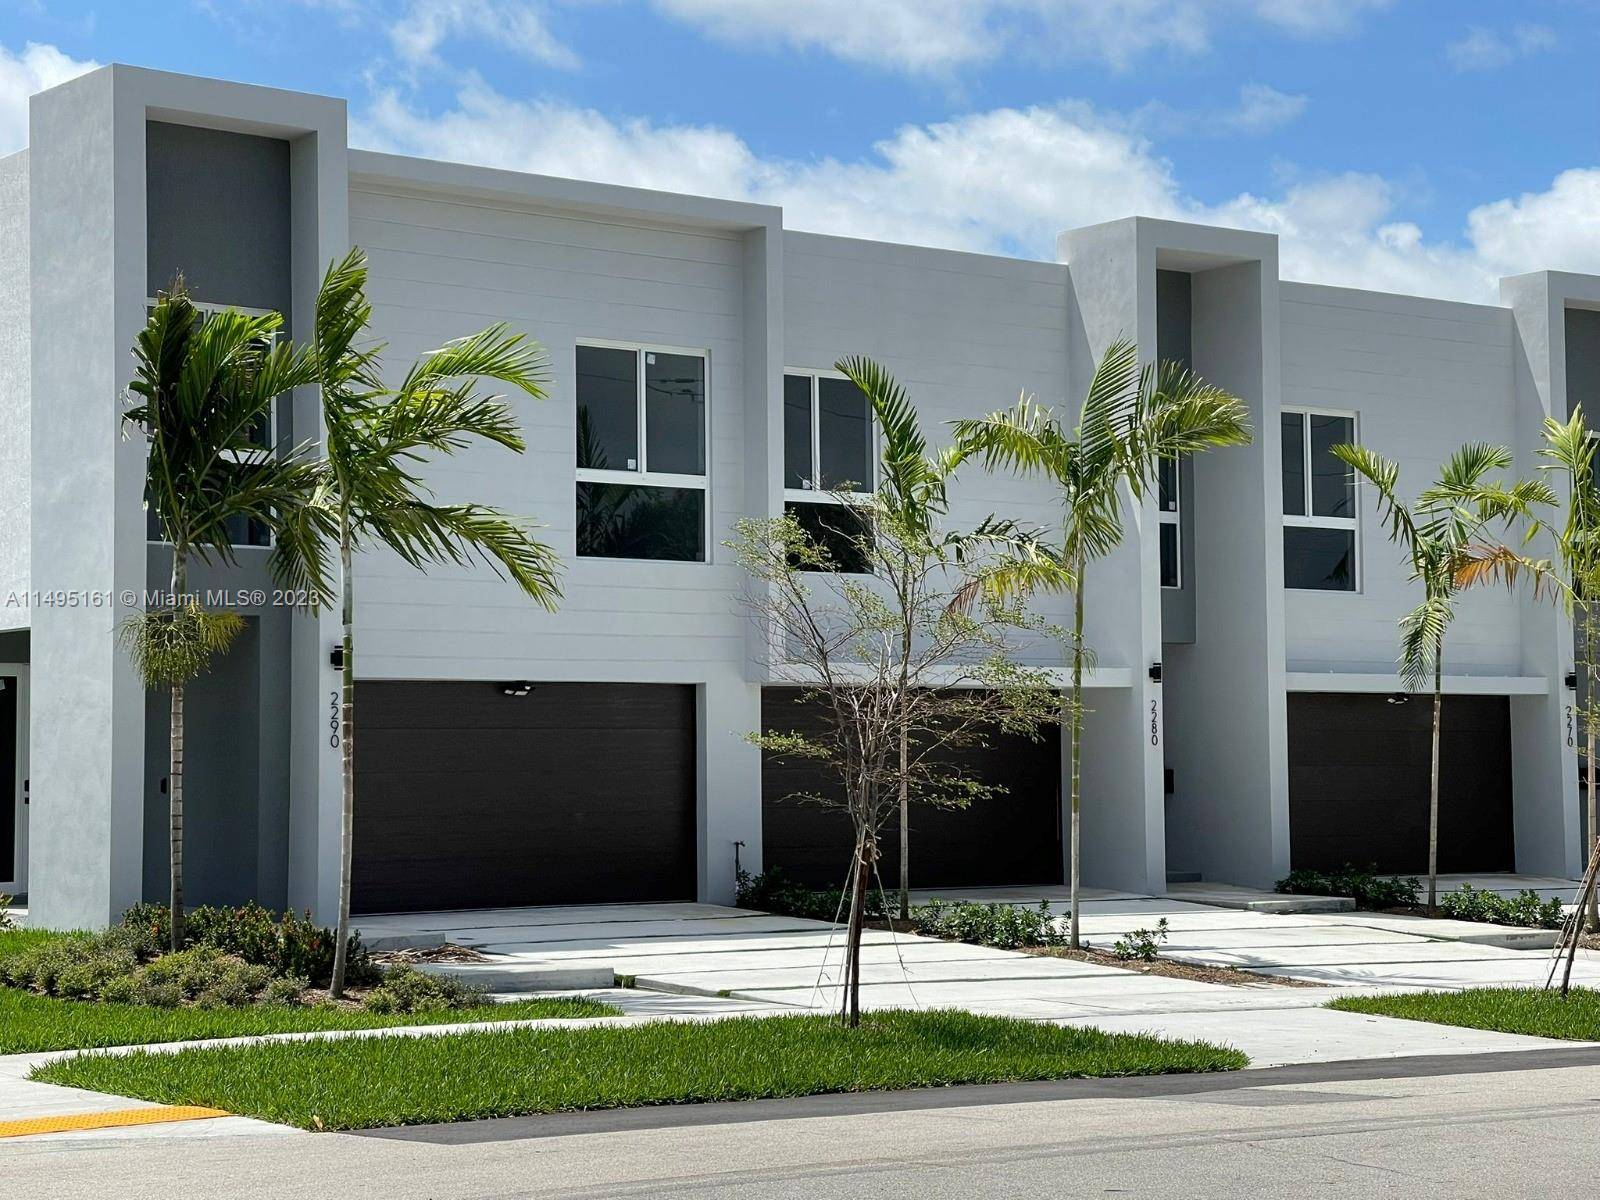 New construction, modern Townhouse with spectacular layout, smart home 3 Master beds with 4 full baths, highcelling, high end finishes kitchen with beautiful counter top of quartz, private patio yard ...